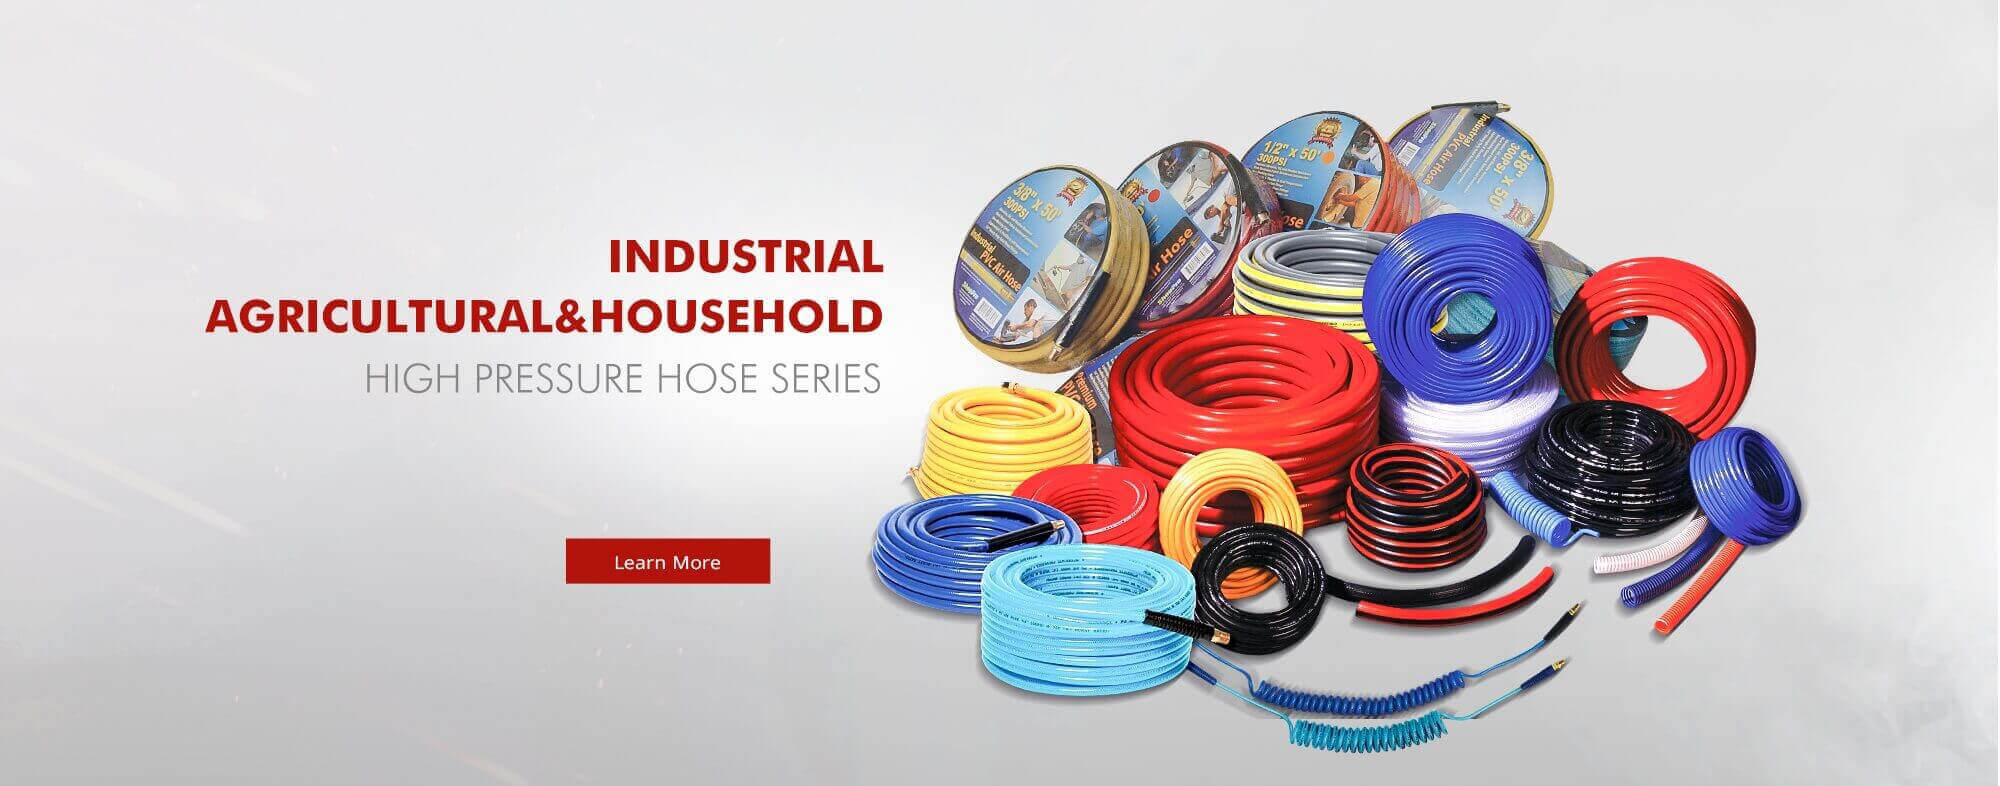 hose and hardware